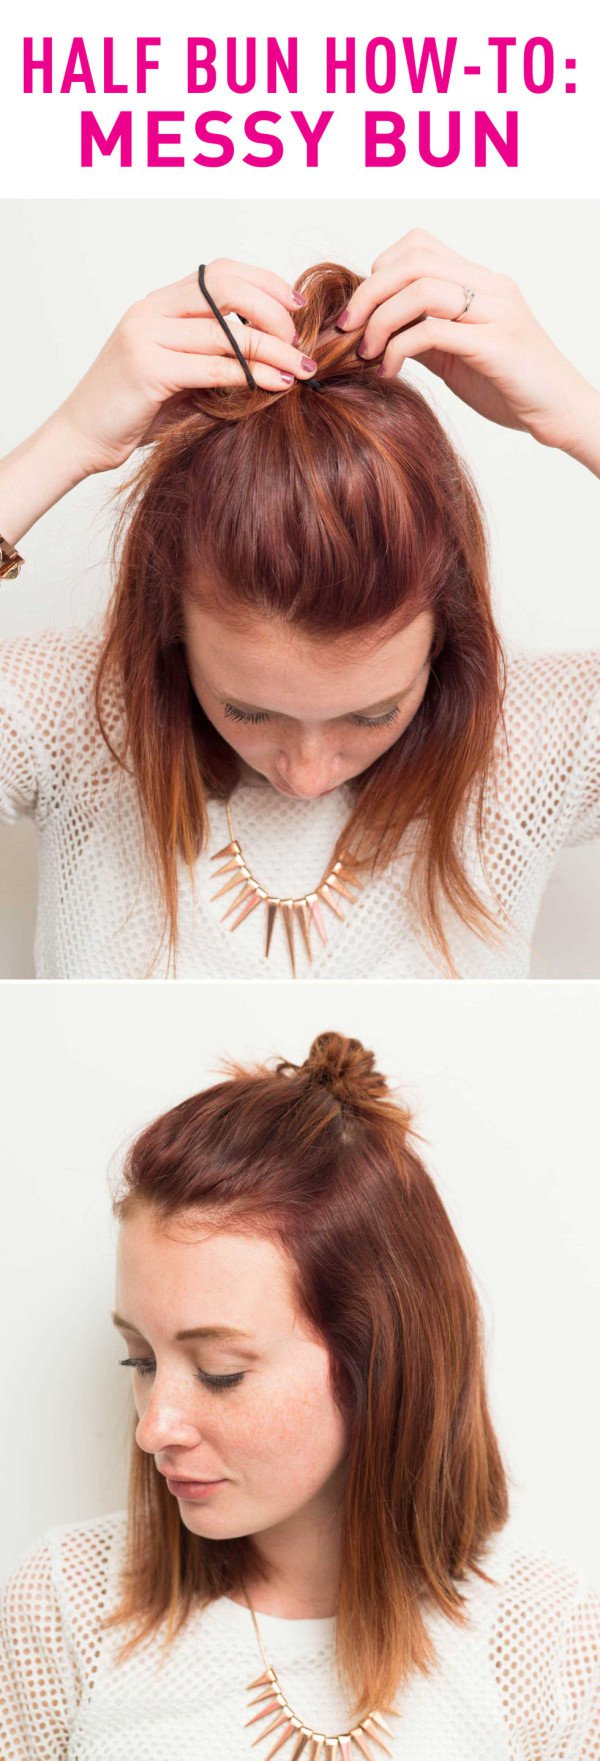 16 Cool Ways to Style Your Look With Half Bun Hairstyle